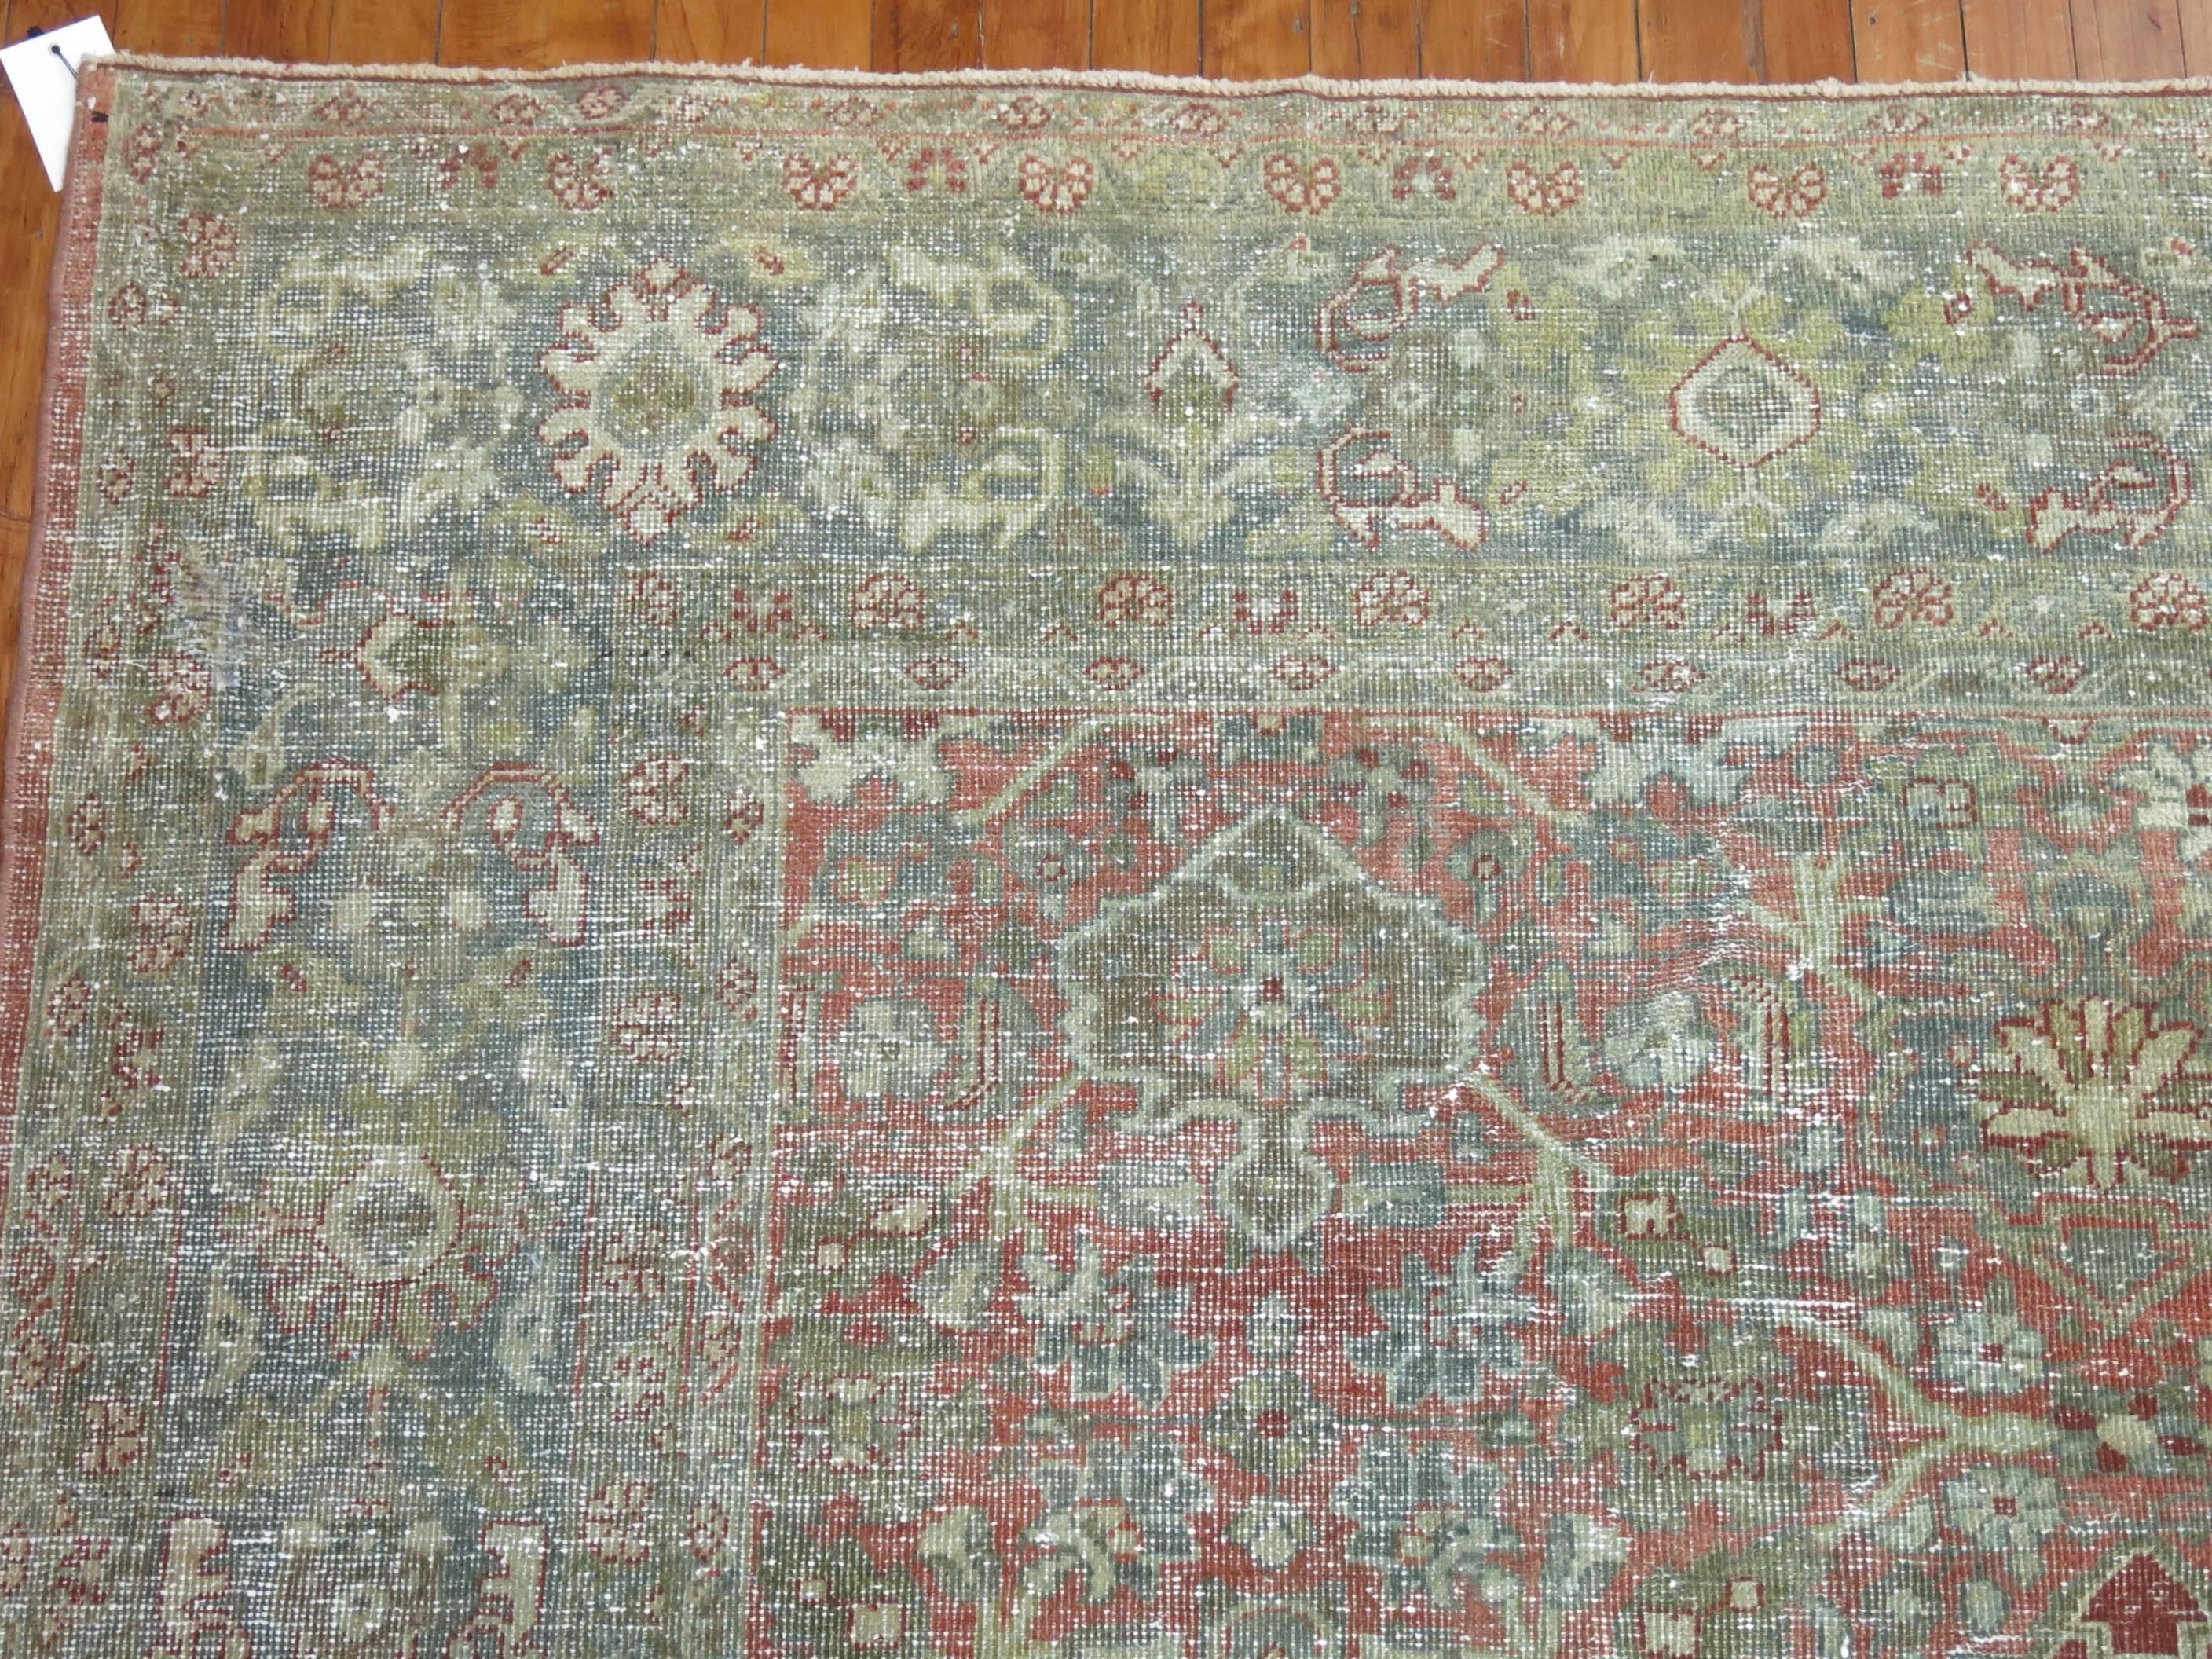 Hand-Knotted Shabby Chic Persian Traditional Mahal Rug In Terracotta and Sea Foam Tones